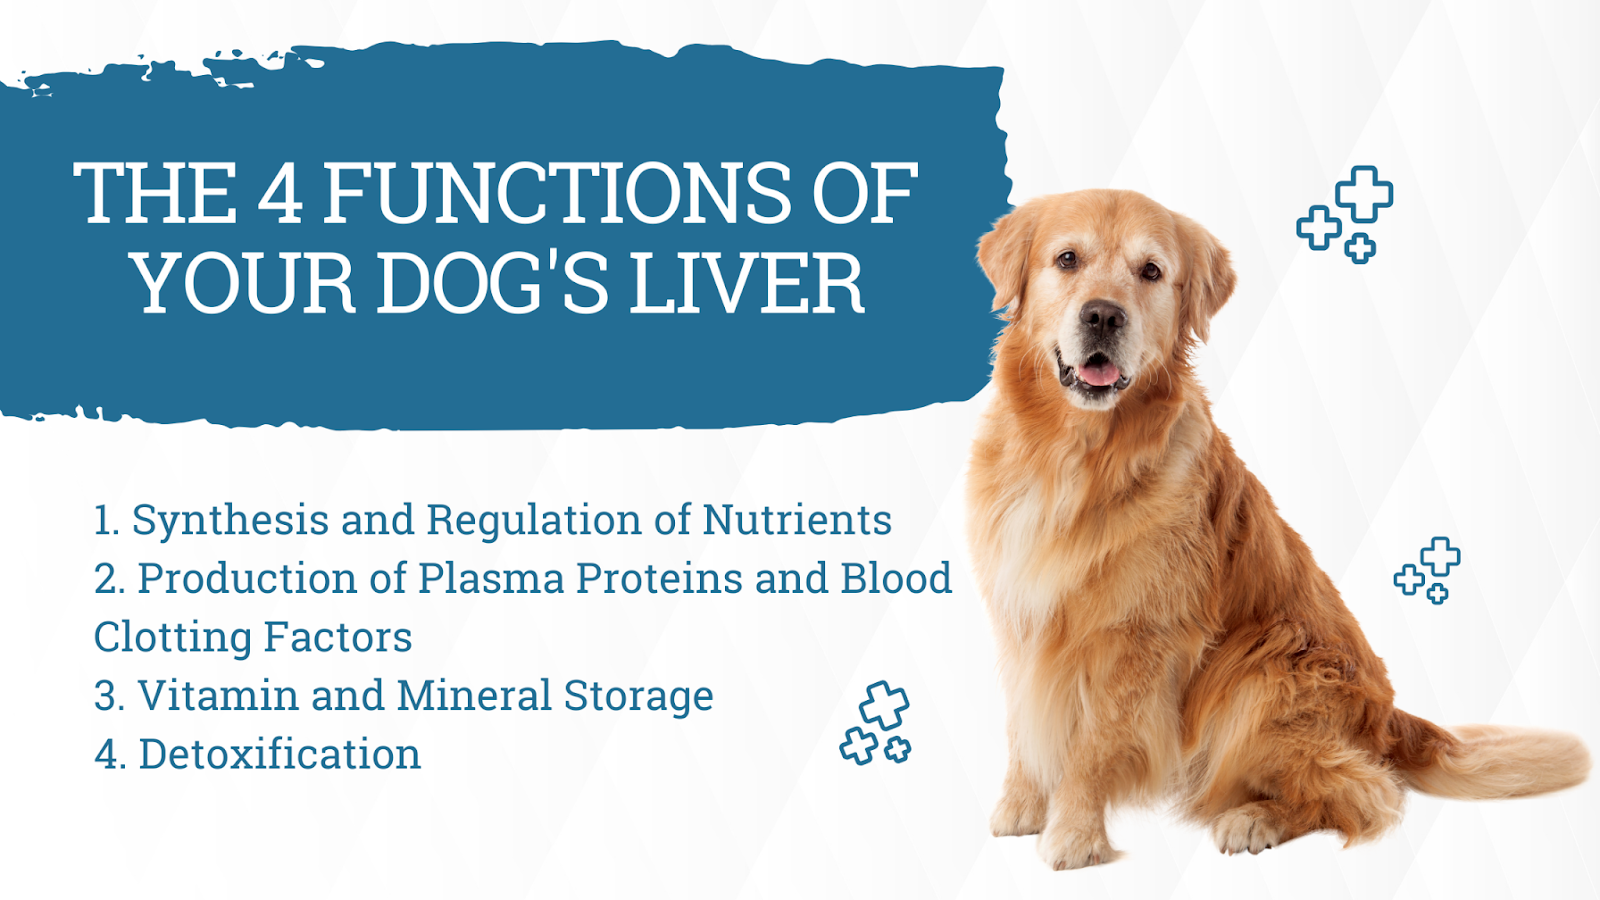 4 functions of a dog's liver